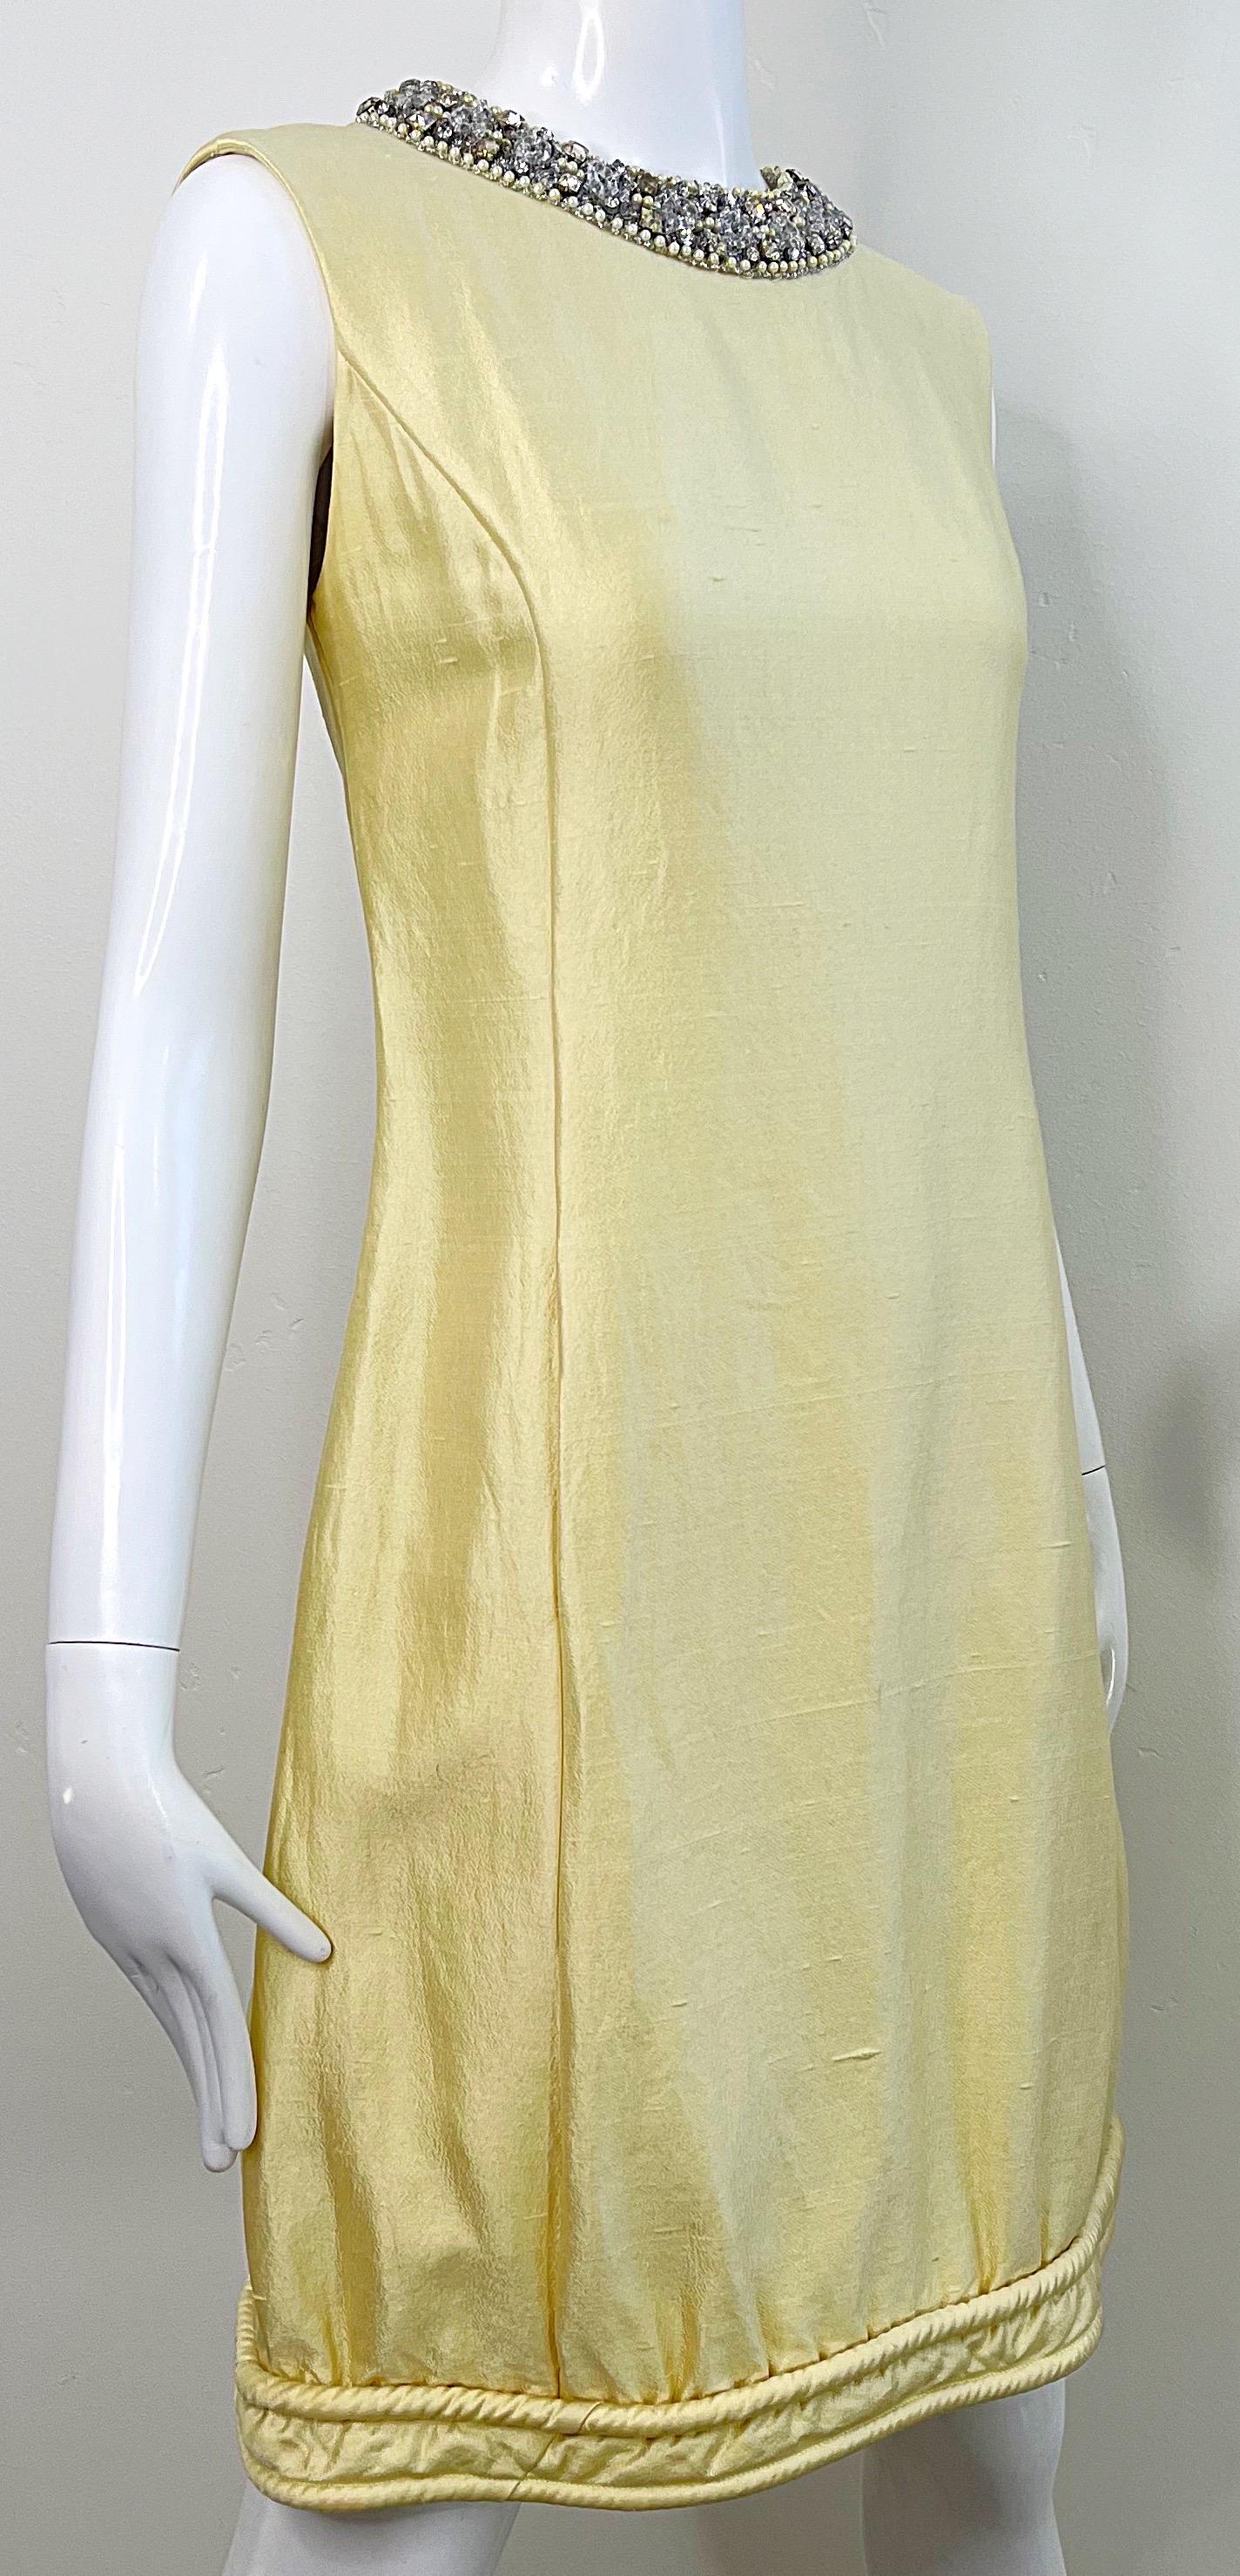 Beige Chic 1960s Pale Yellow Silk Shantung Rhinestone Beaded Vintage 60s Shift Dress For Sale